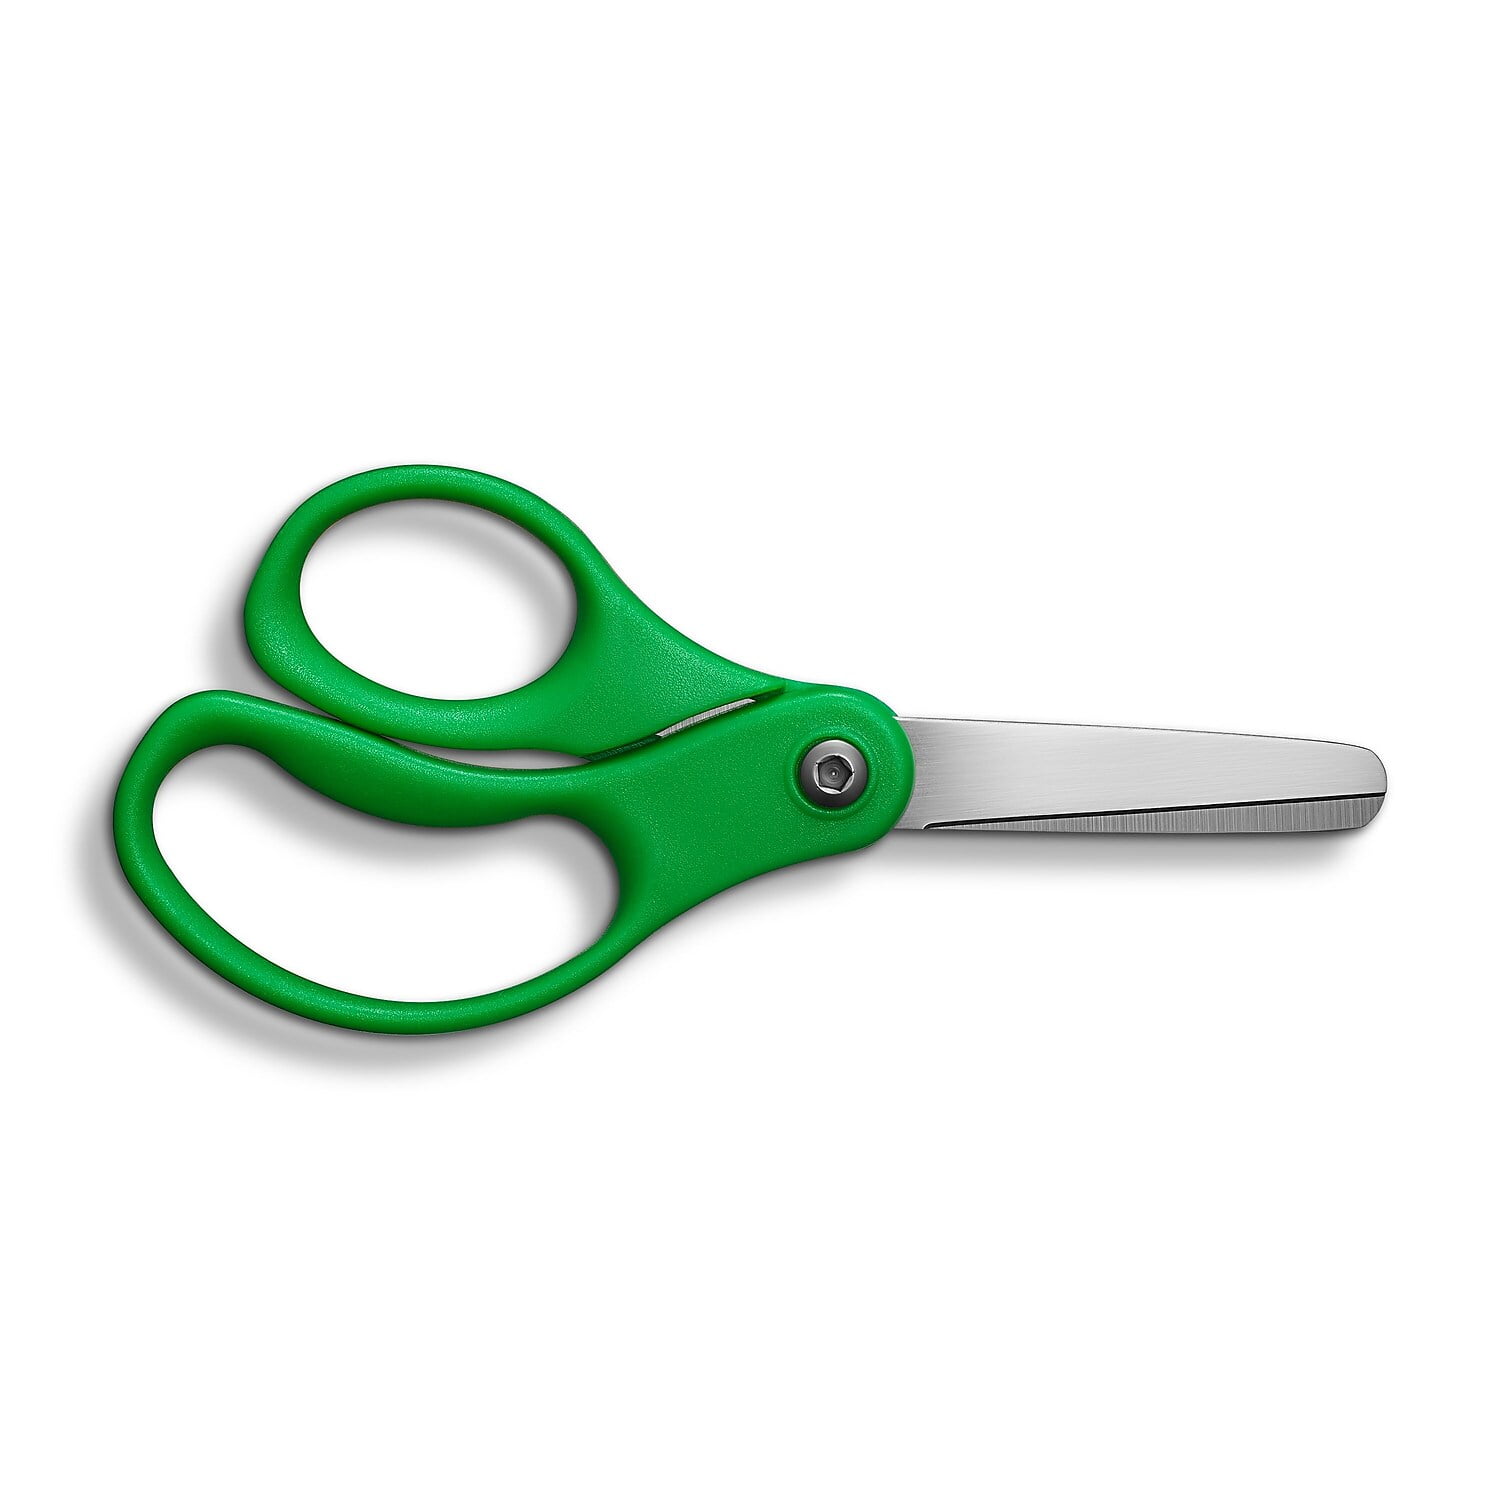  TRU RED 24380494 8 Stainless Steel Scissors, Straight Handle :  Office Products